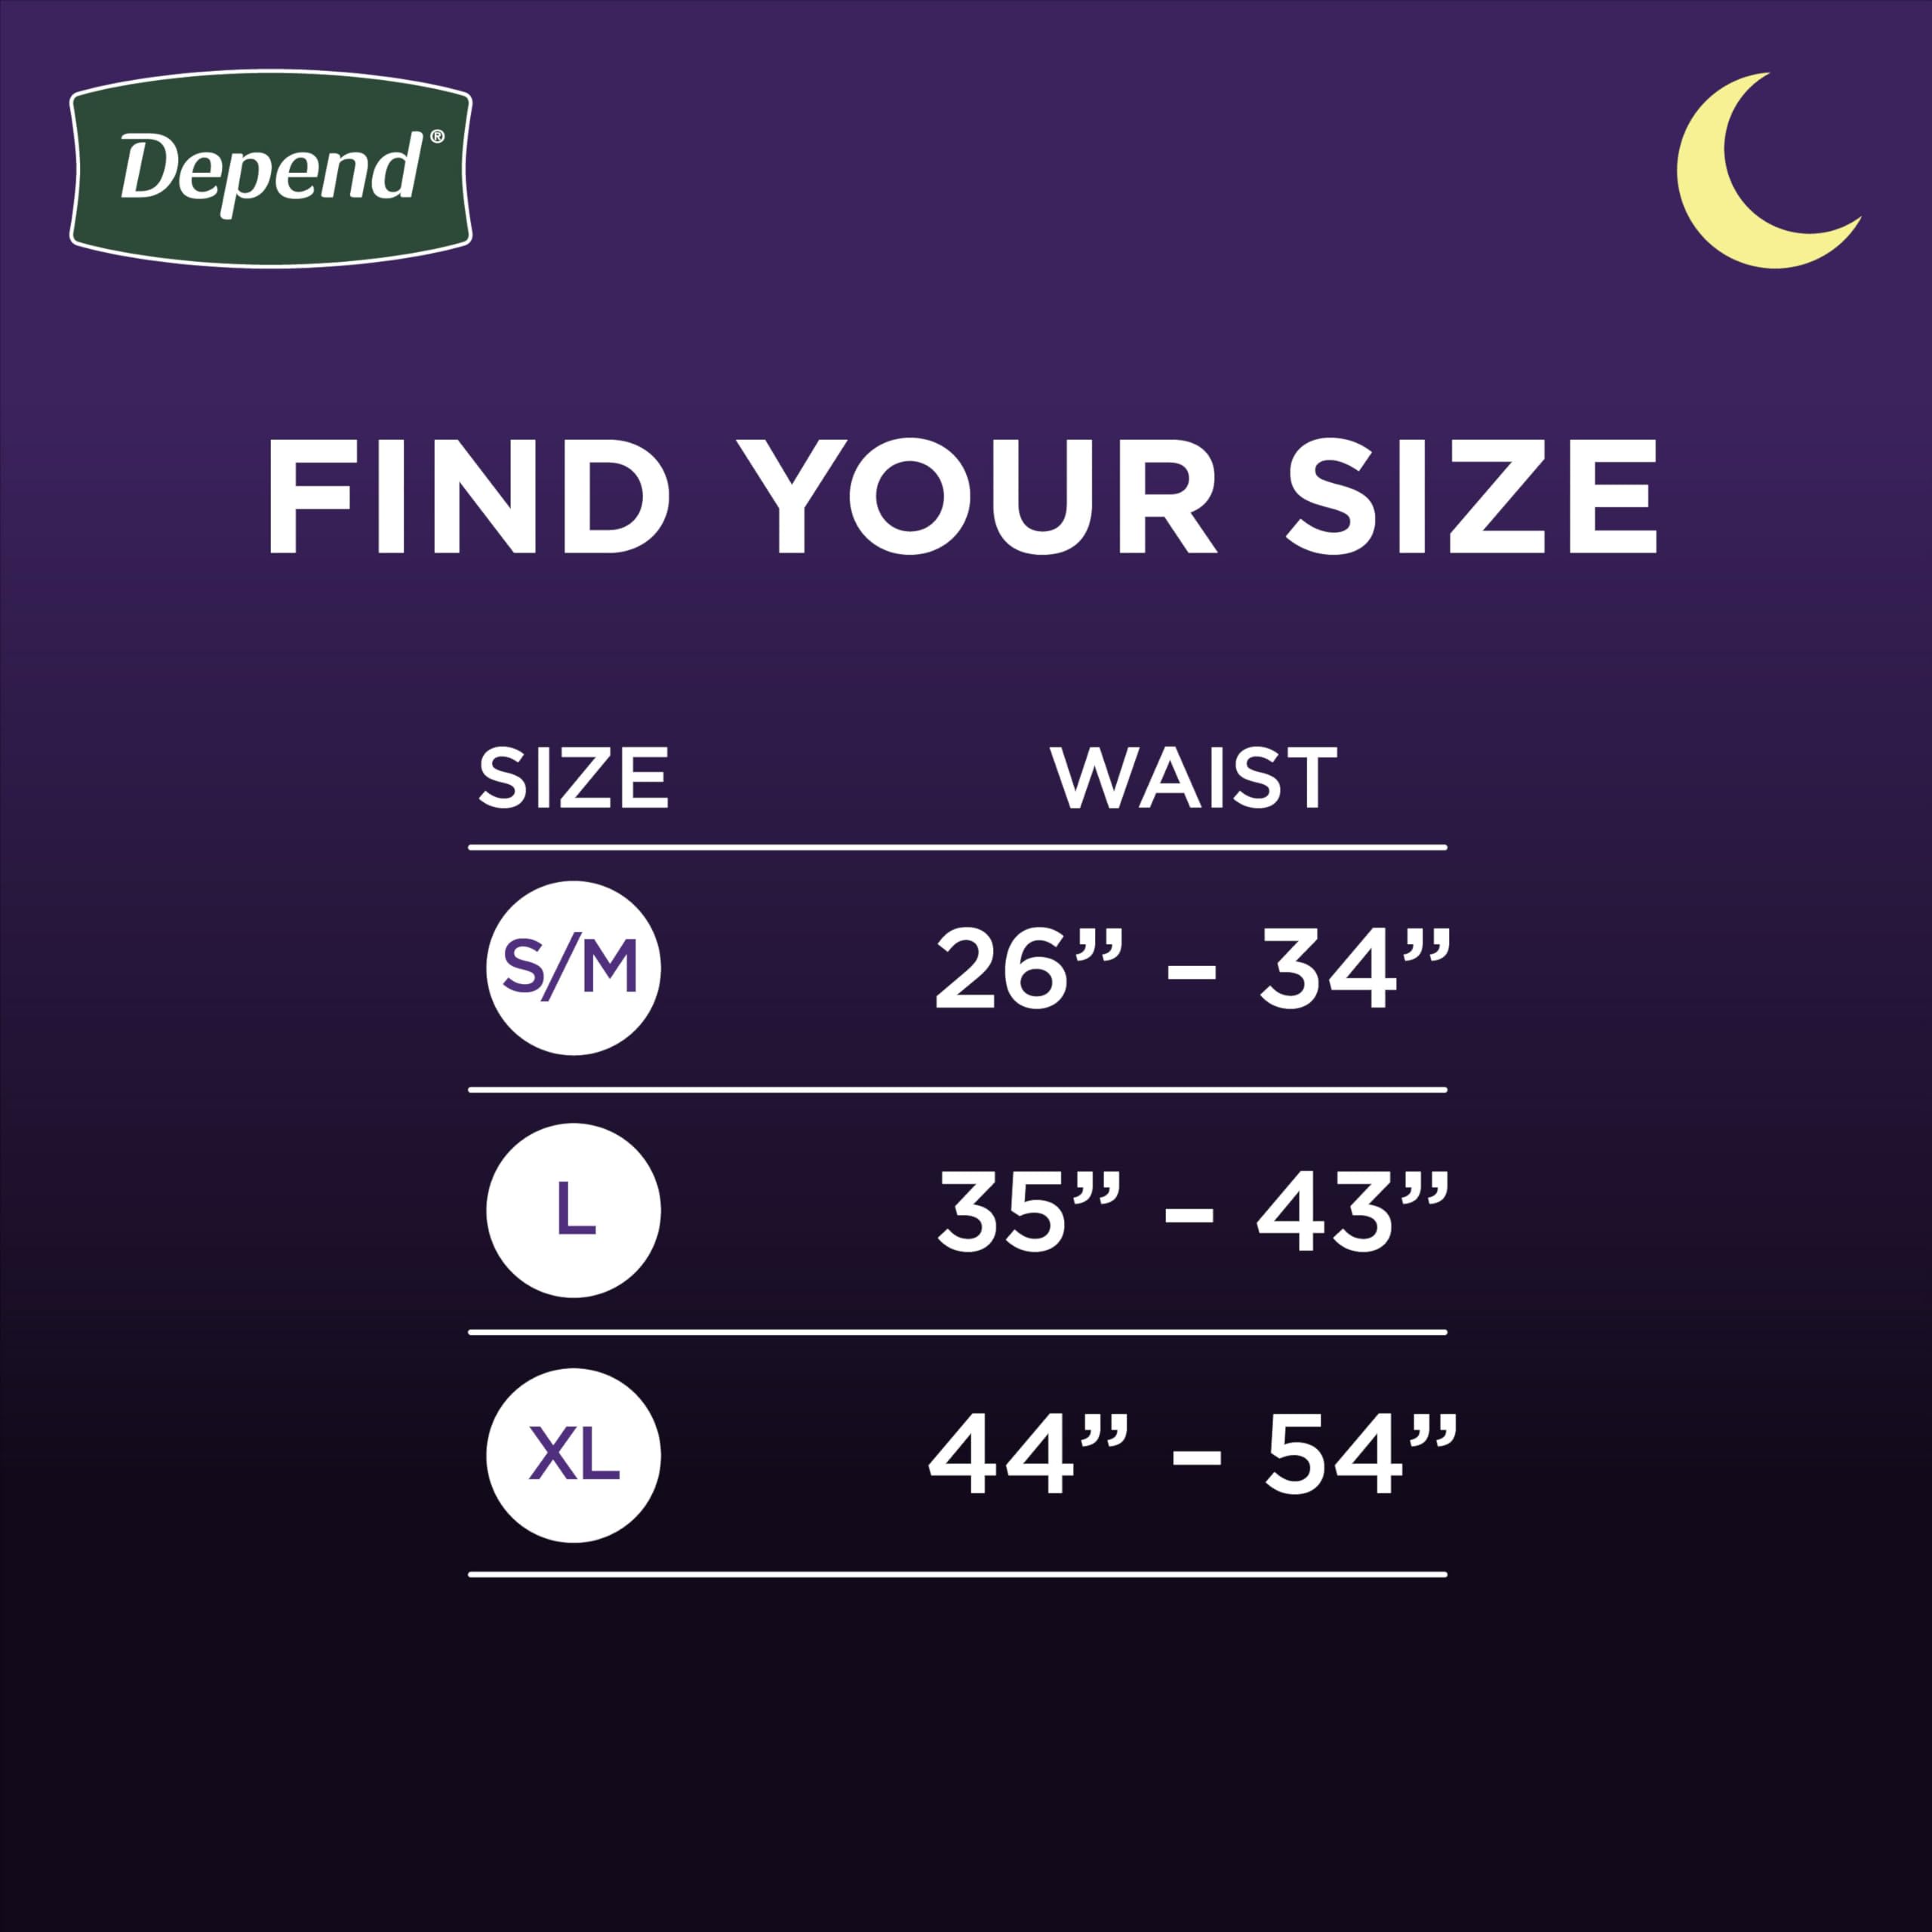 Depend Night Defense Adult Incontinence Underwear for Men, Disposable, Overnight, Extra-Large, Grey, 20 Count, Packaging May Vary